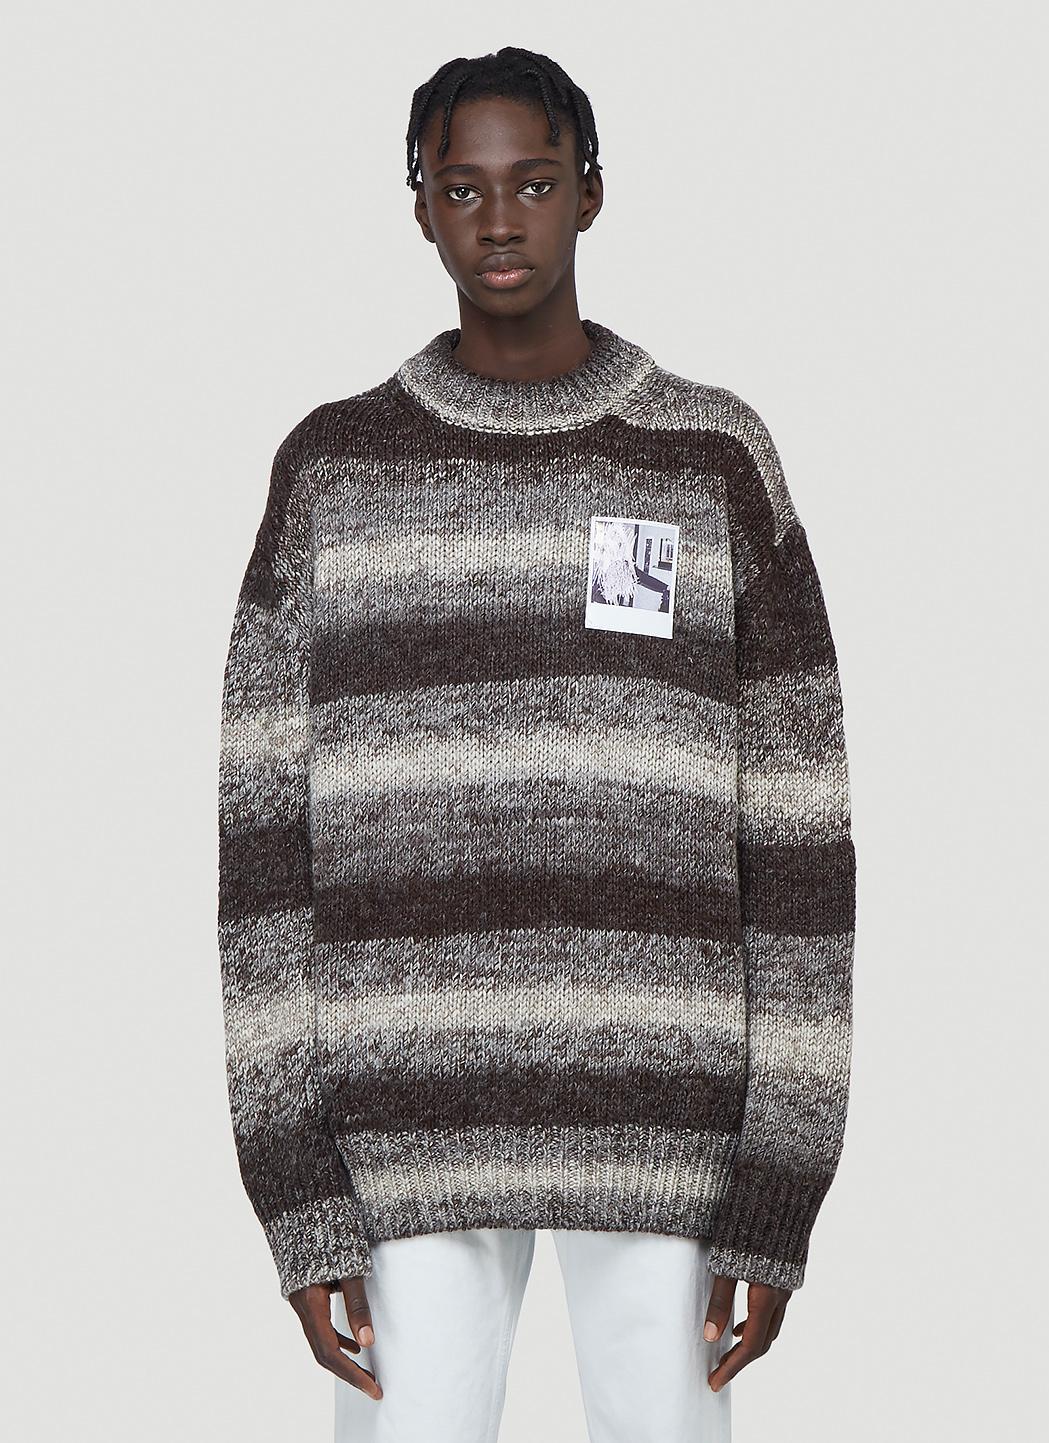 Raf Simons Oversized Striped-knit Sweater in Brown for Men - Lyst